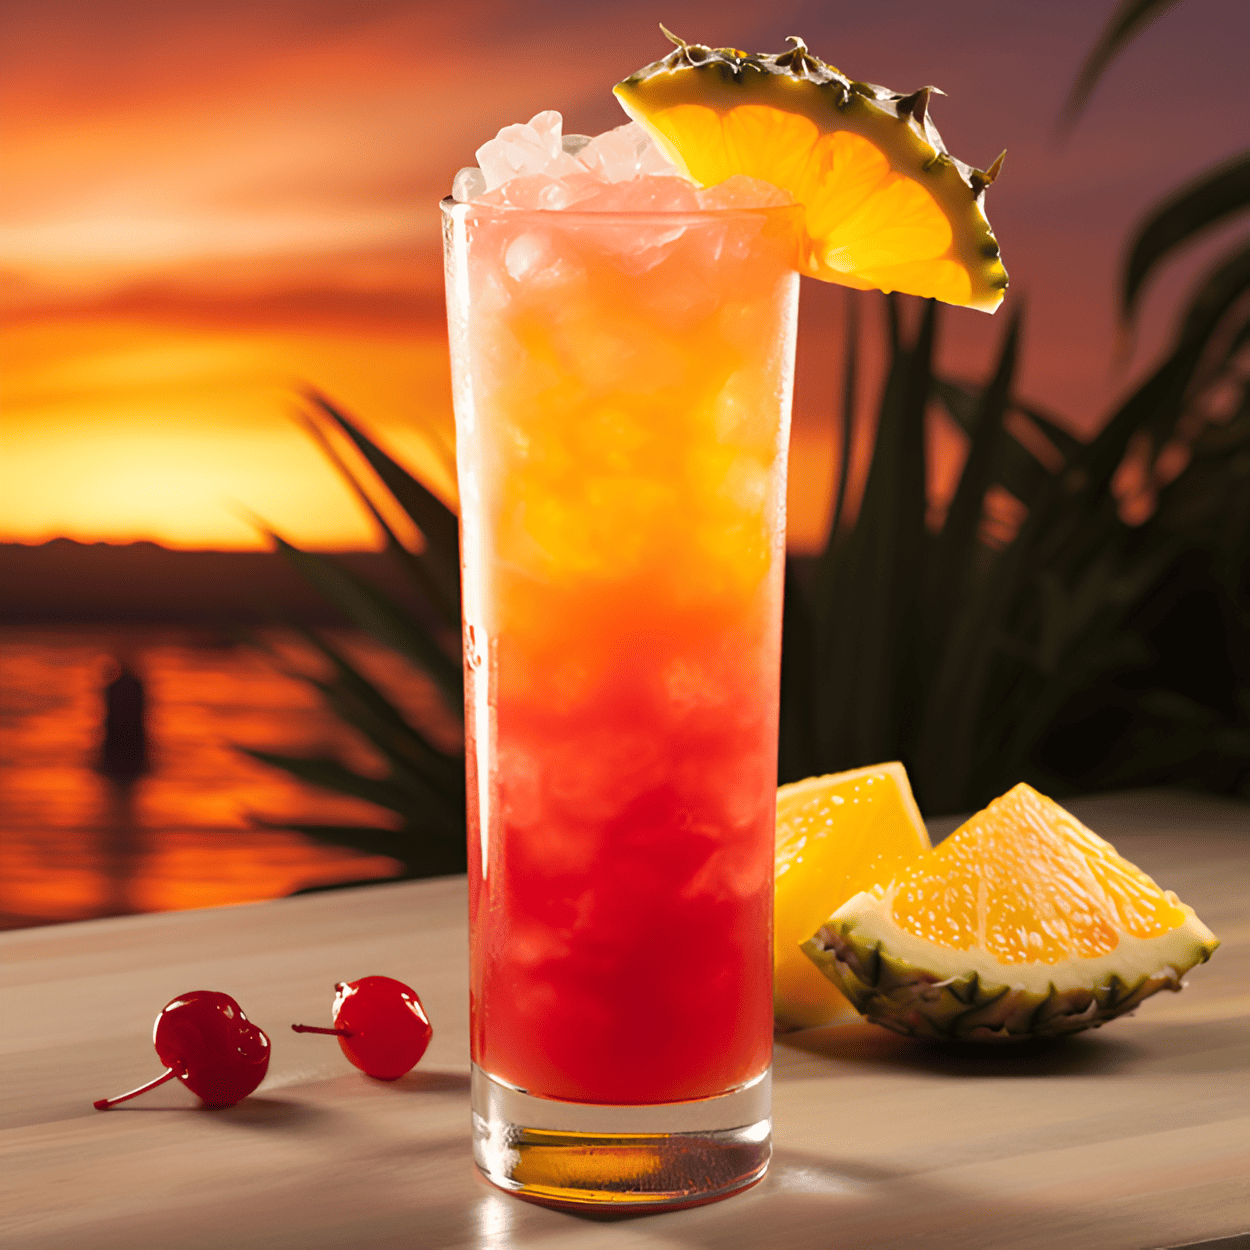 Tropical Screwdriver Cocktail Recipe - The Tropical Screwdriver is a sweet, fruity cocktail with a strong citrus kick. The vodka provides a smooth, strong base, while the orange and pineapple juices add a refreshing, tropical sweetness. The grenadine gives it a slight tartness and a beautiful sunset color.